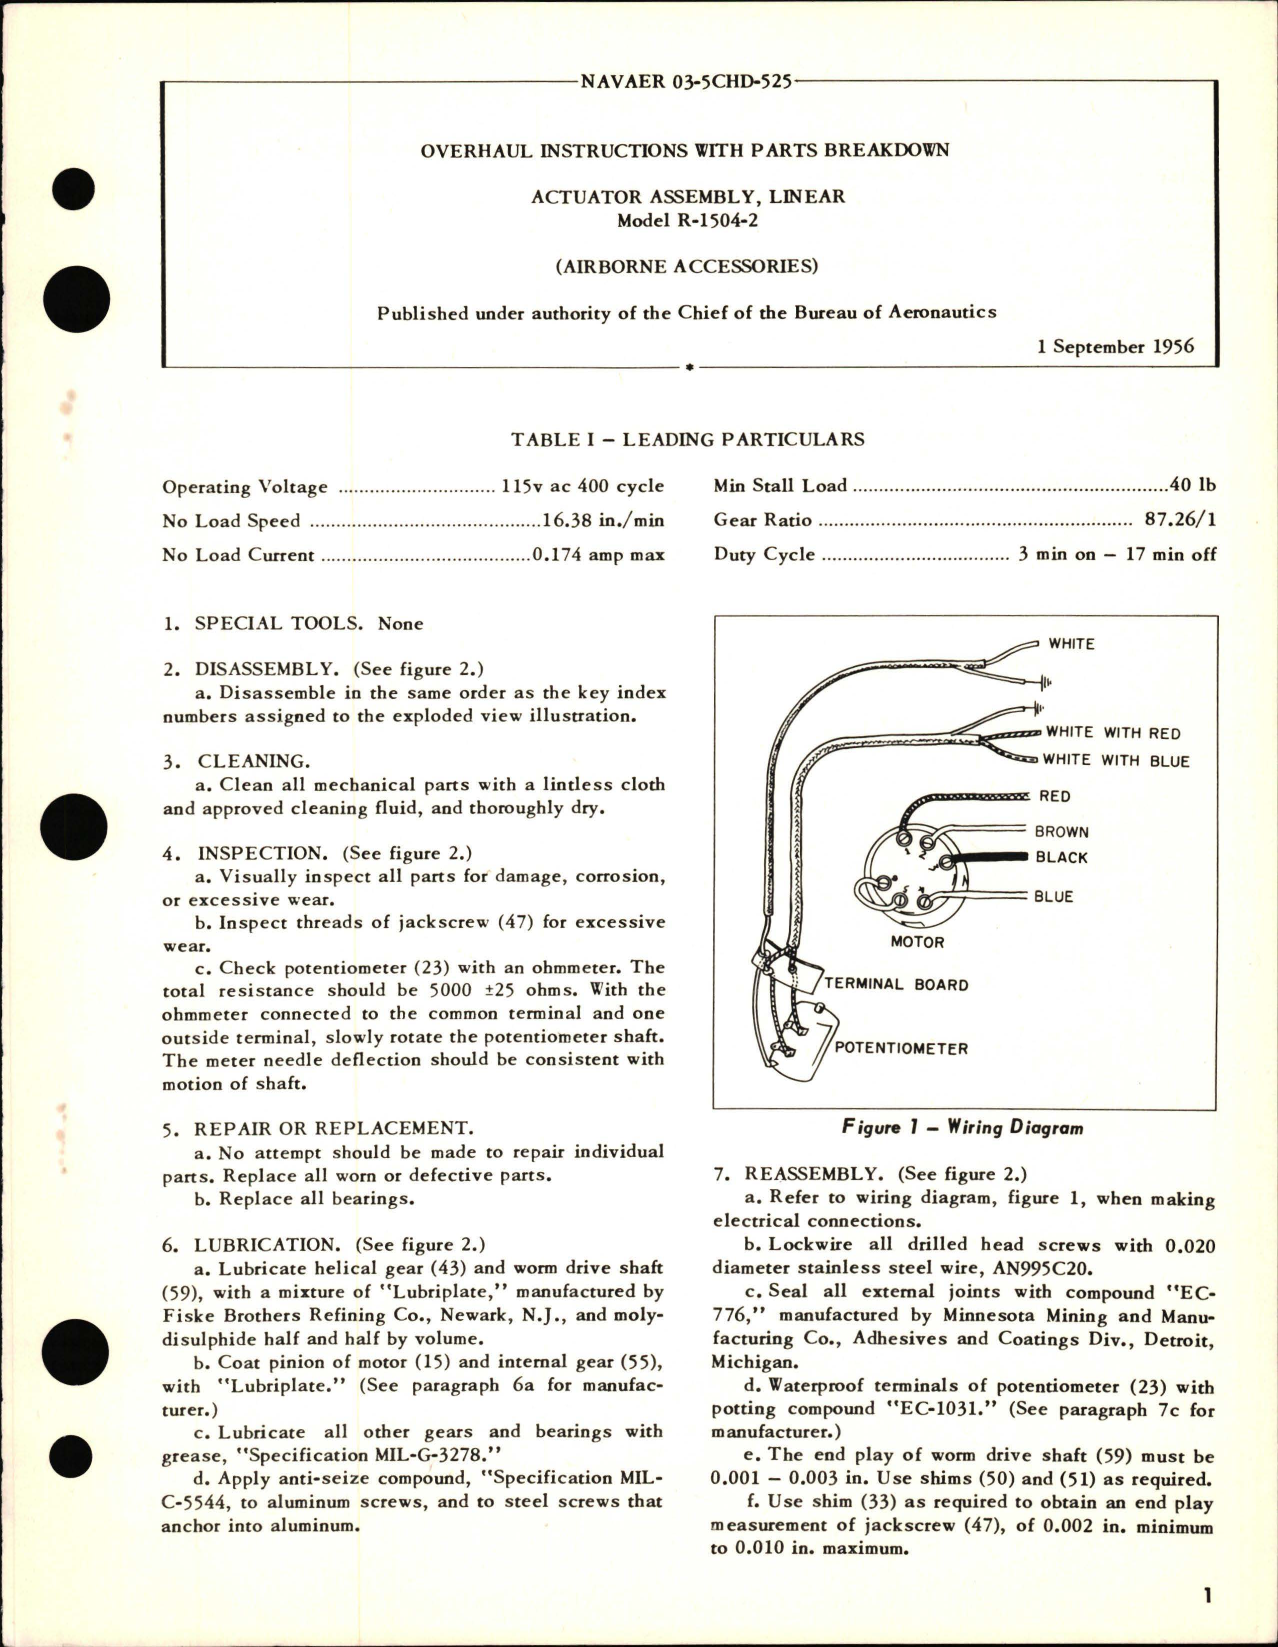 Sample page 1 from AirCorps Library document: Overhaul Instructions with Parts Breakdown for Actuator Assembly, Linear Model R-1504-2